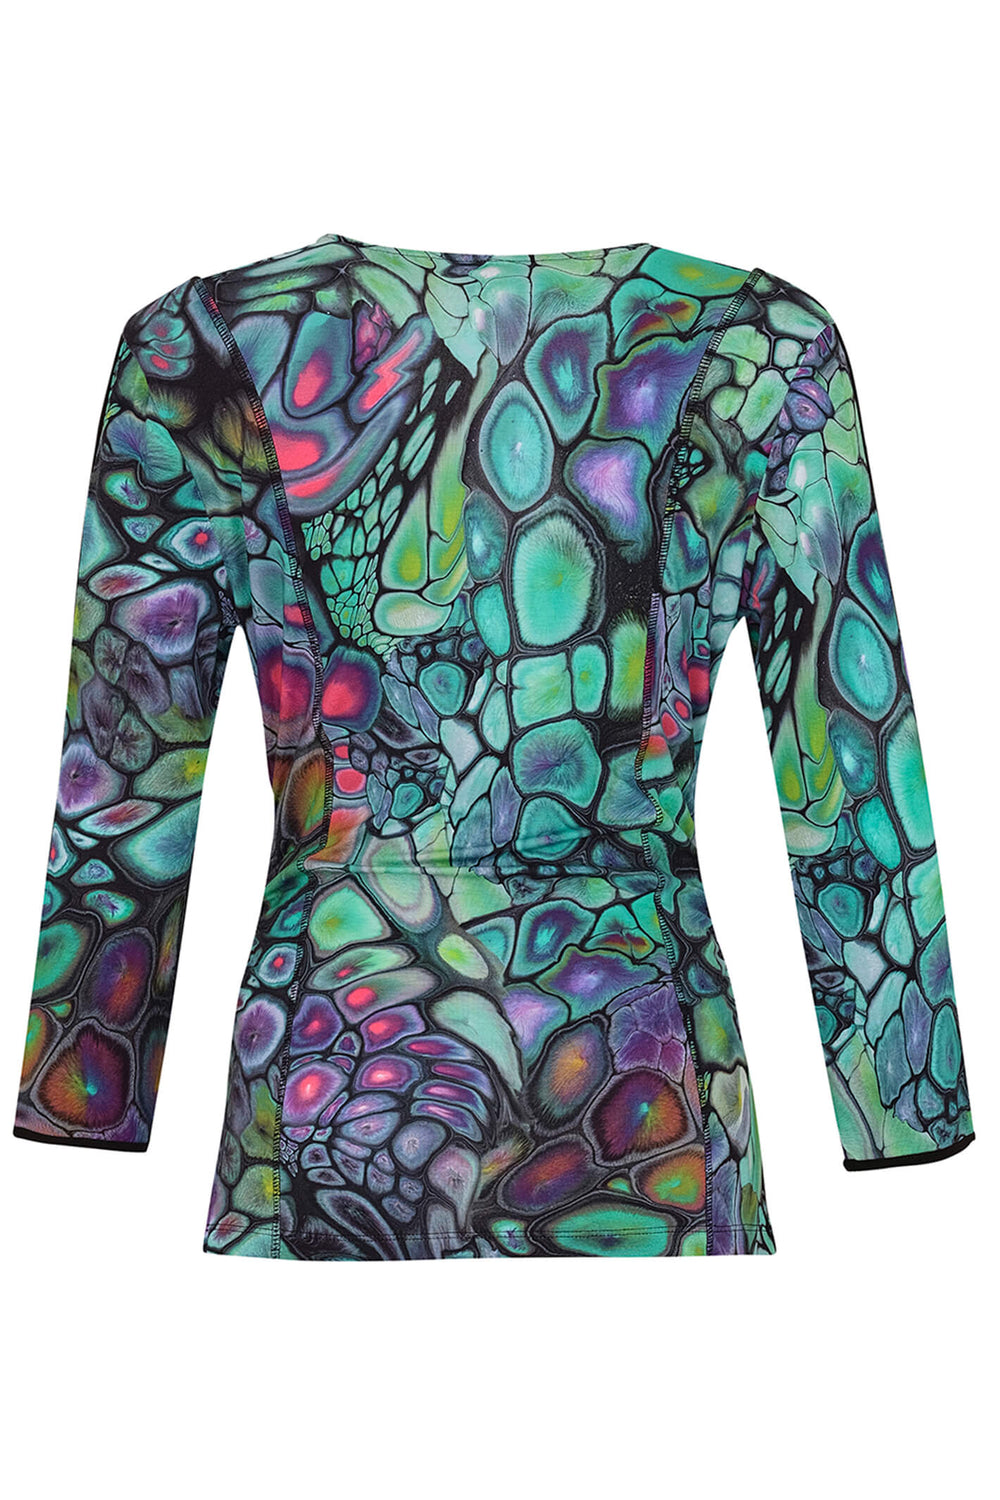 Dolcezza 73661 Green Maria Brookes Print Wrap Style Top - Experience Boutique